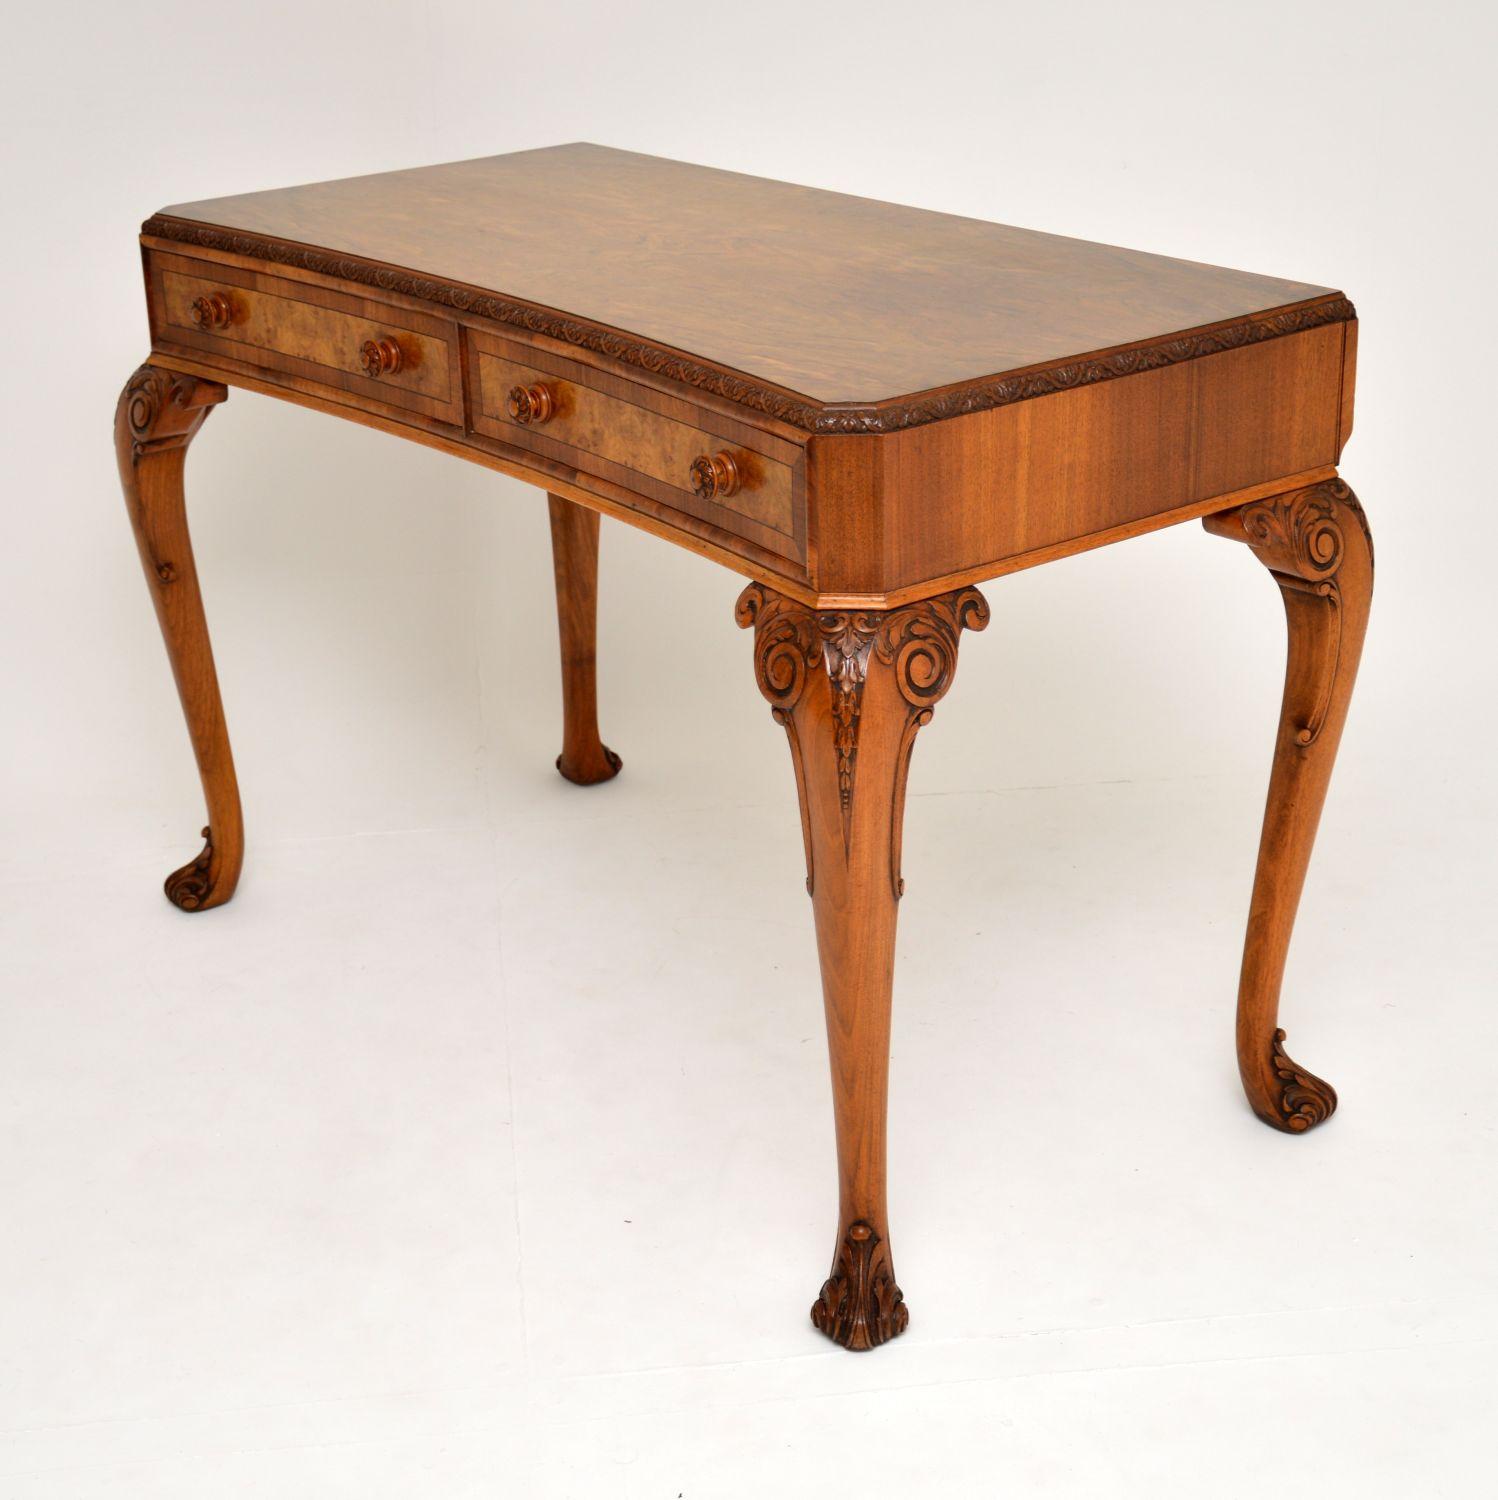 English Antique Burr Walnut Queen Anne Style Console Server Table